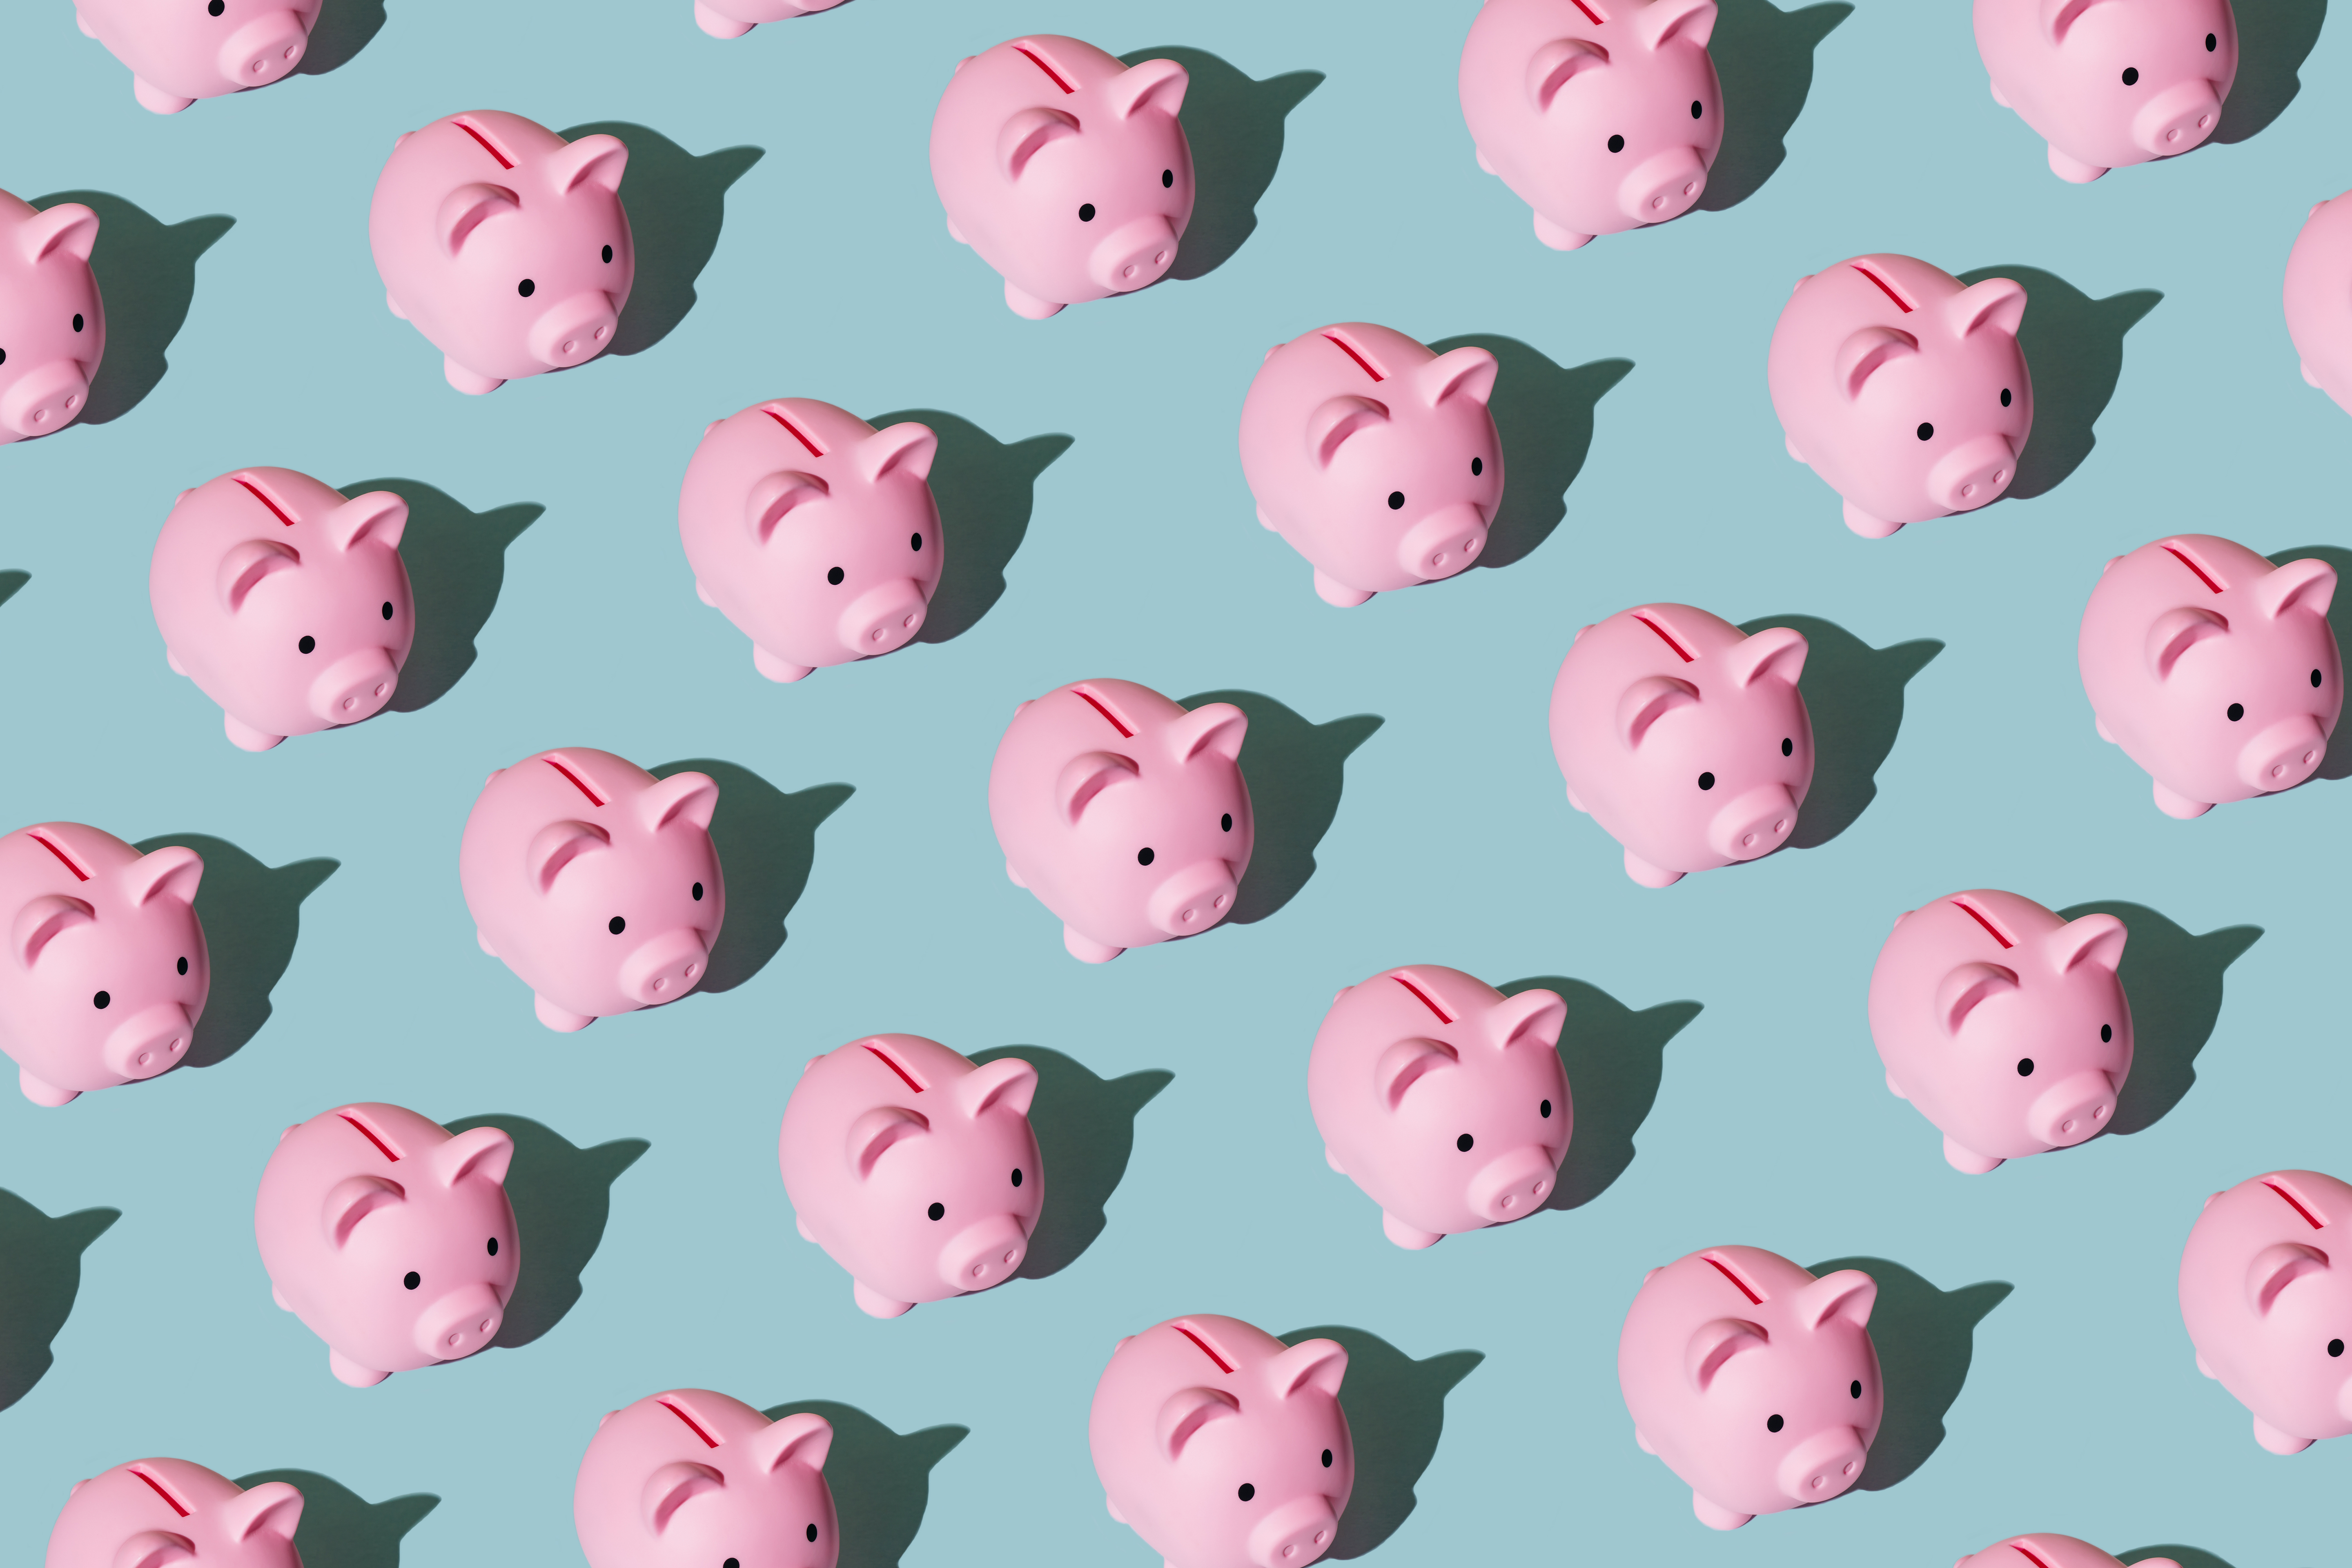 Pattern made of pink piggy banks on a blue background.